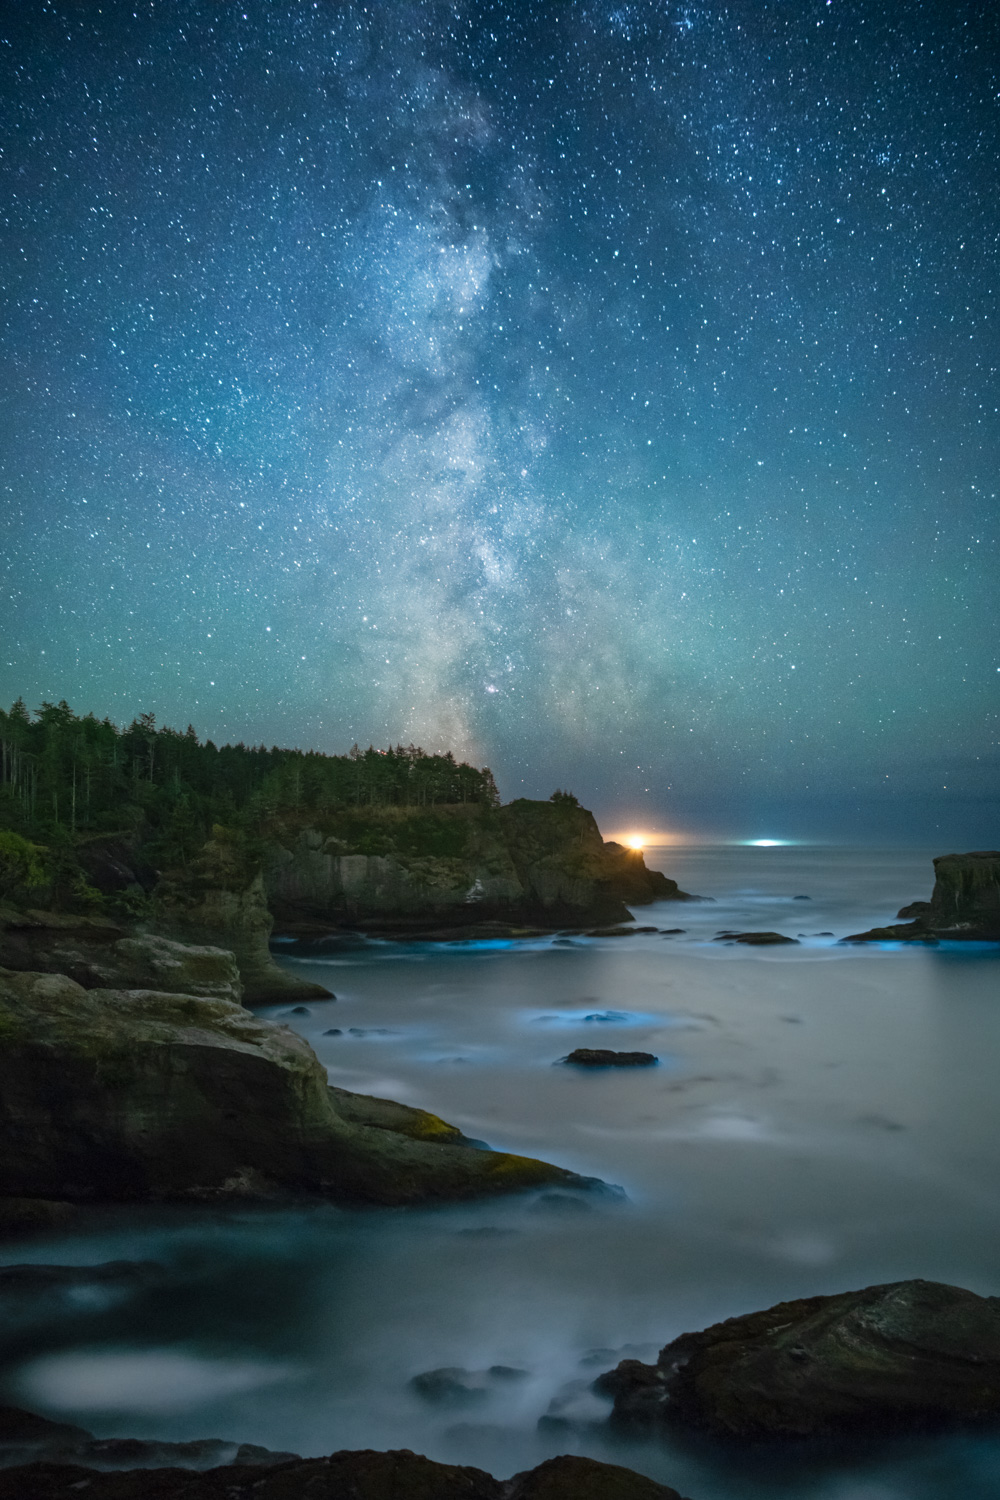 The Milky Way galaxy above Cape Flattery with bioluminescent plankton in the waters below.